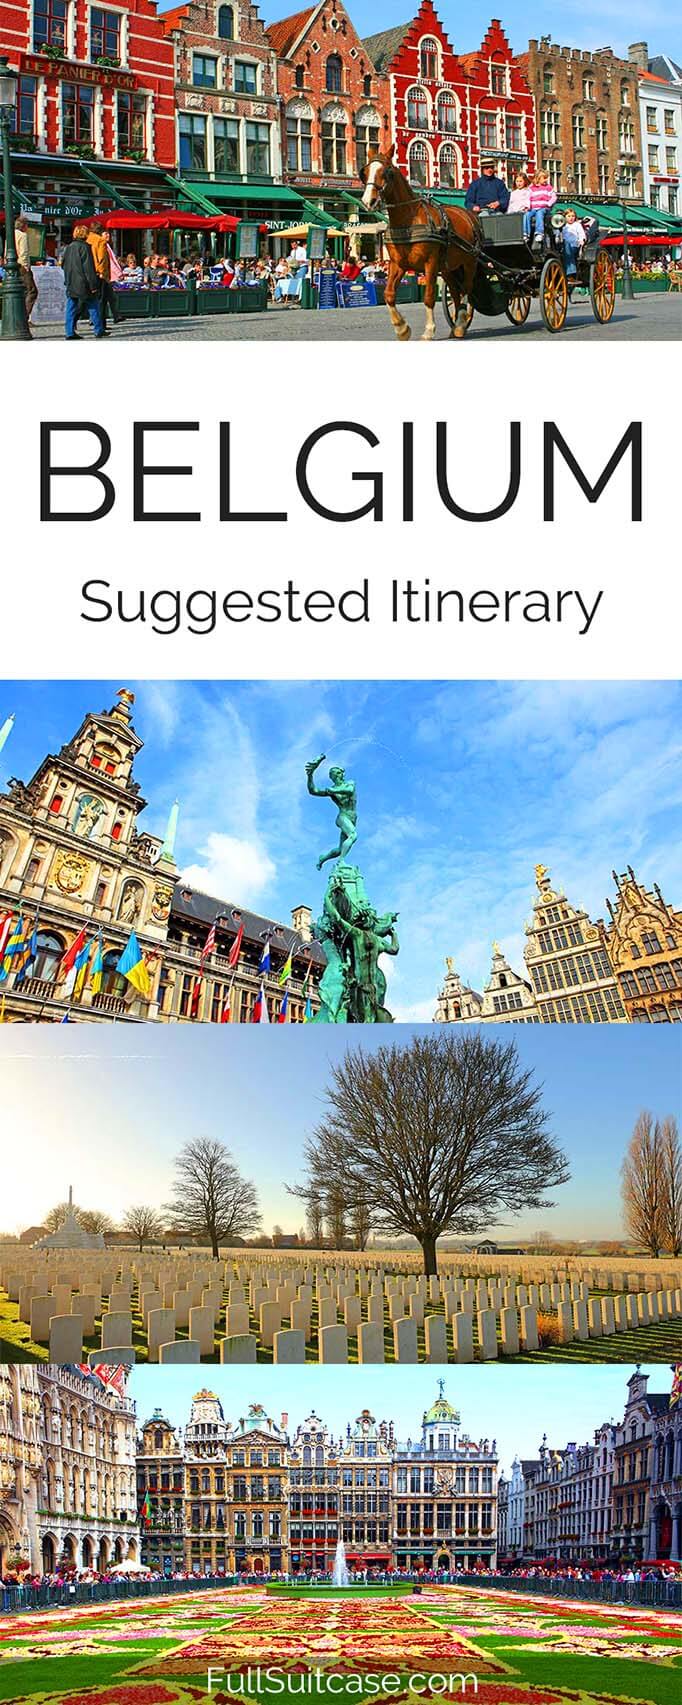 Suggested itinerary for Belgium in three or four days